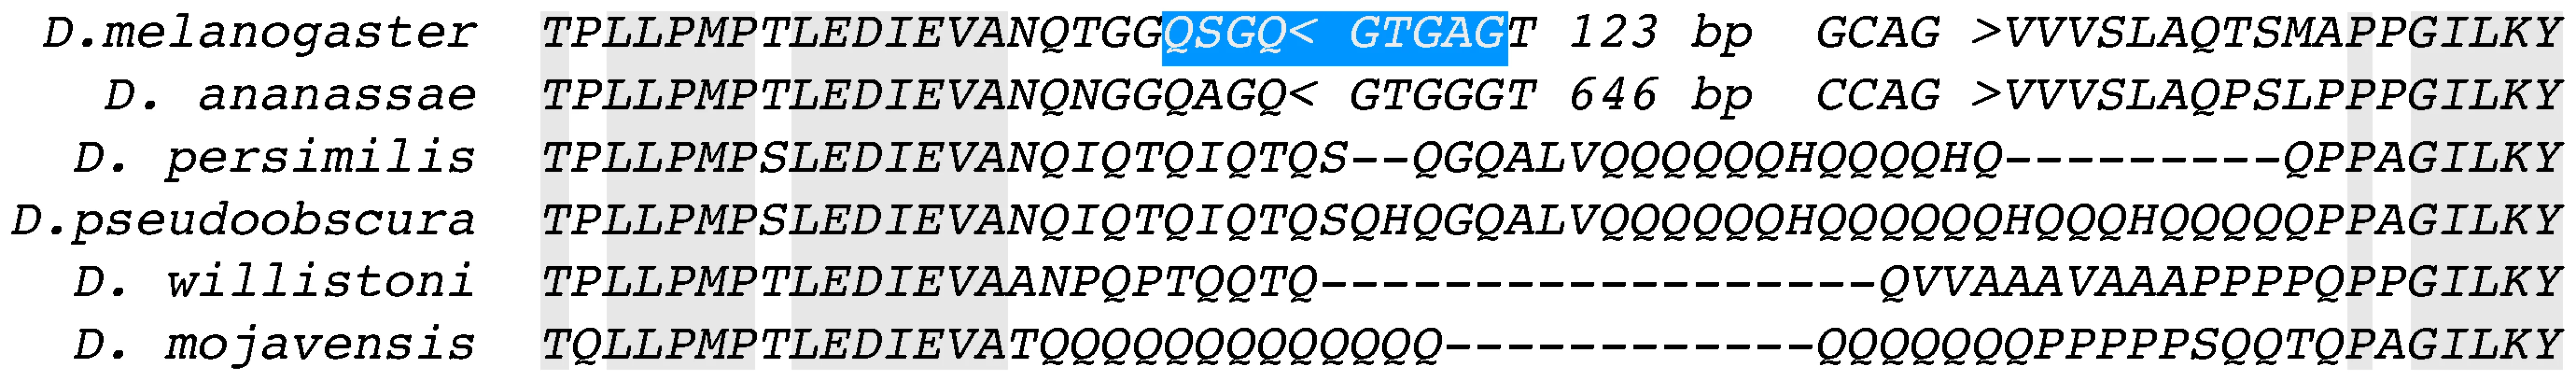 Intron gain in response to low complexity sequence in the gene CG42594.